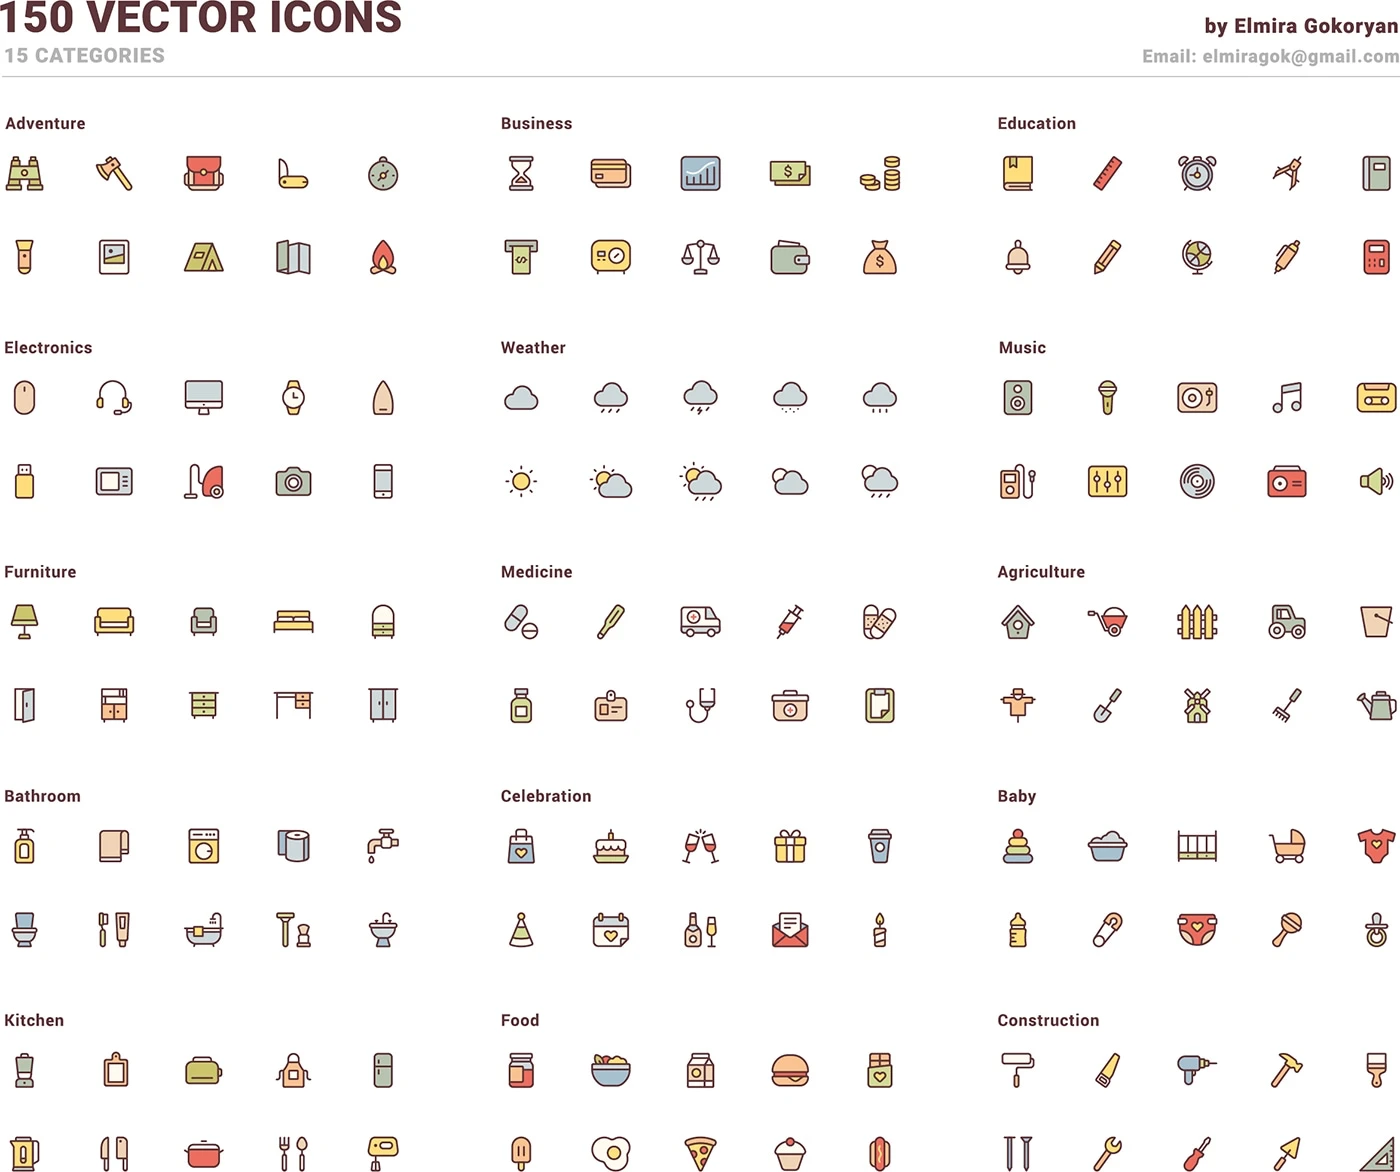 150 Free Vector Icons - 